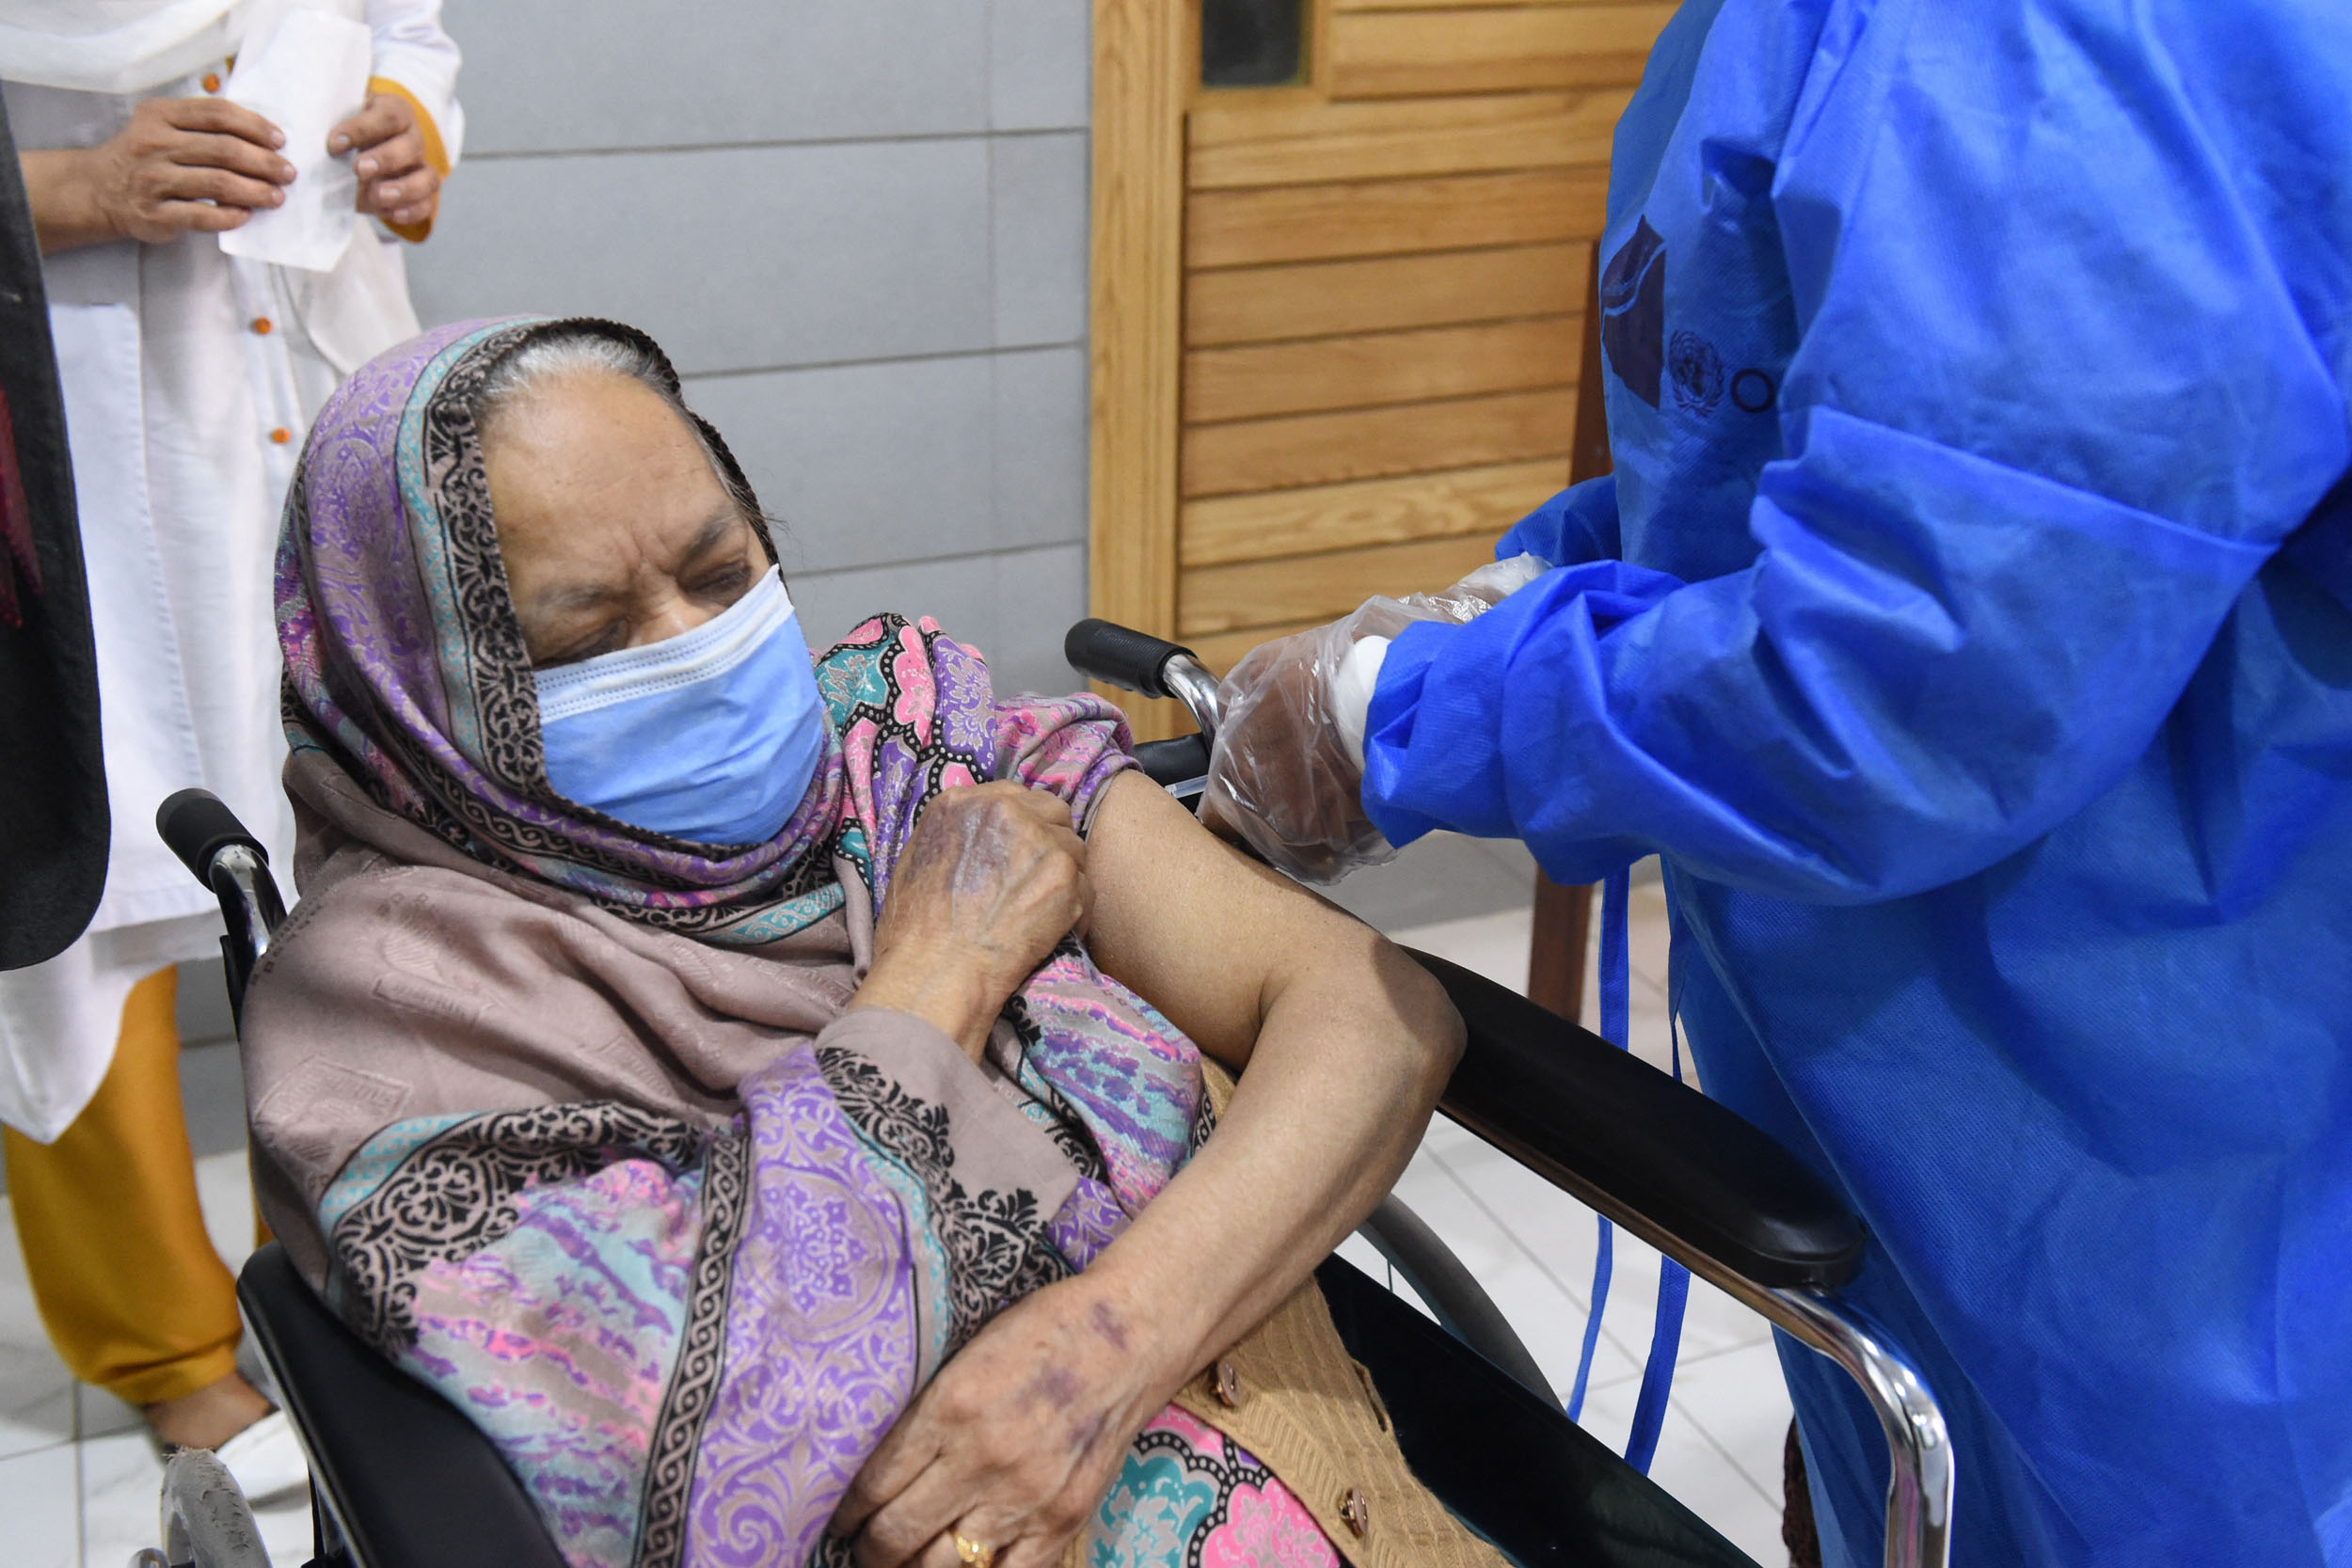 A senior citizen receives a dose of the Chinese-made Sinopharm vaccine against the Covid-19 coronavirus, at a vaccination centre in Quetta on April 6, 2021. (Photo by Banaras KHAN / AFP)